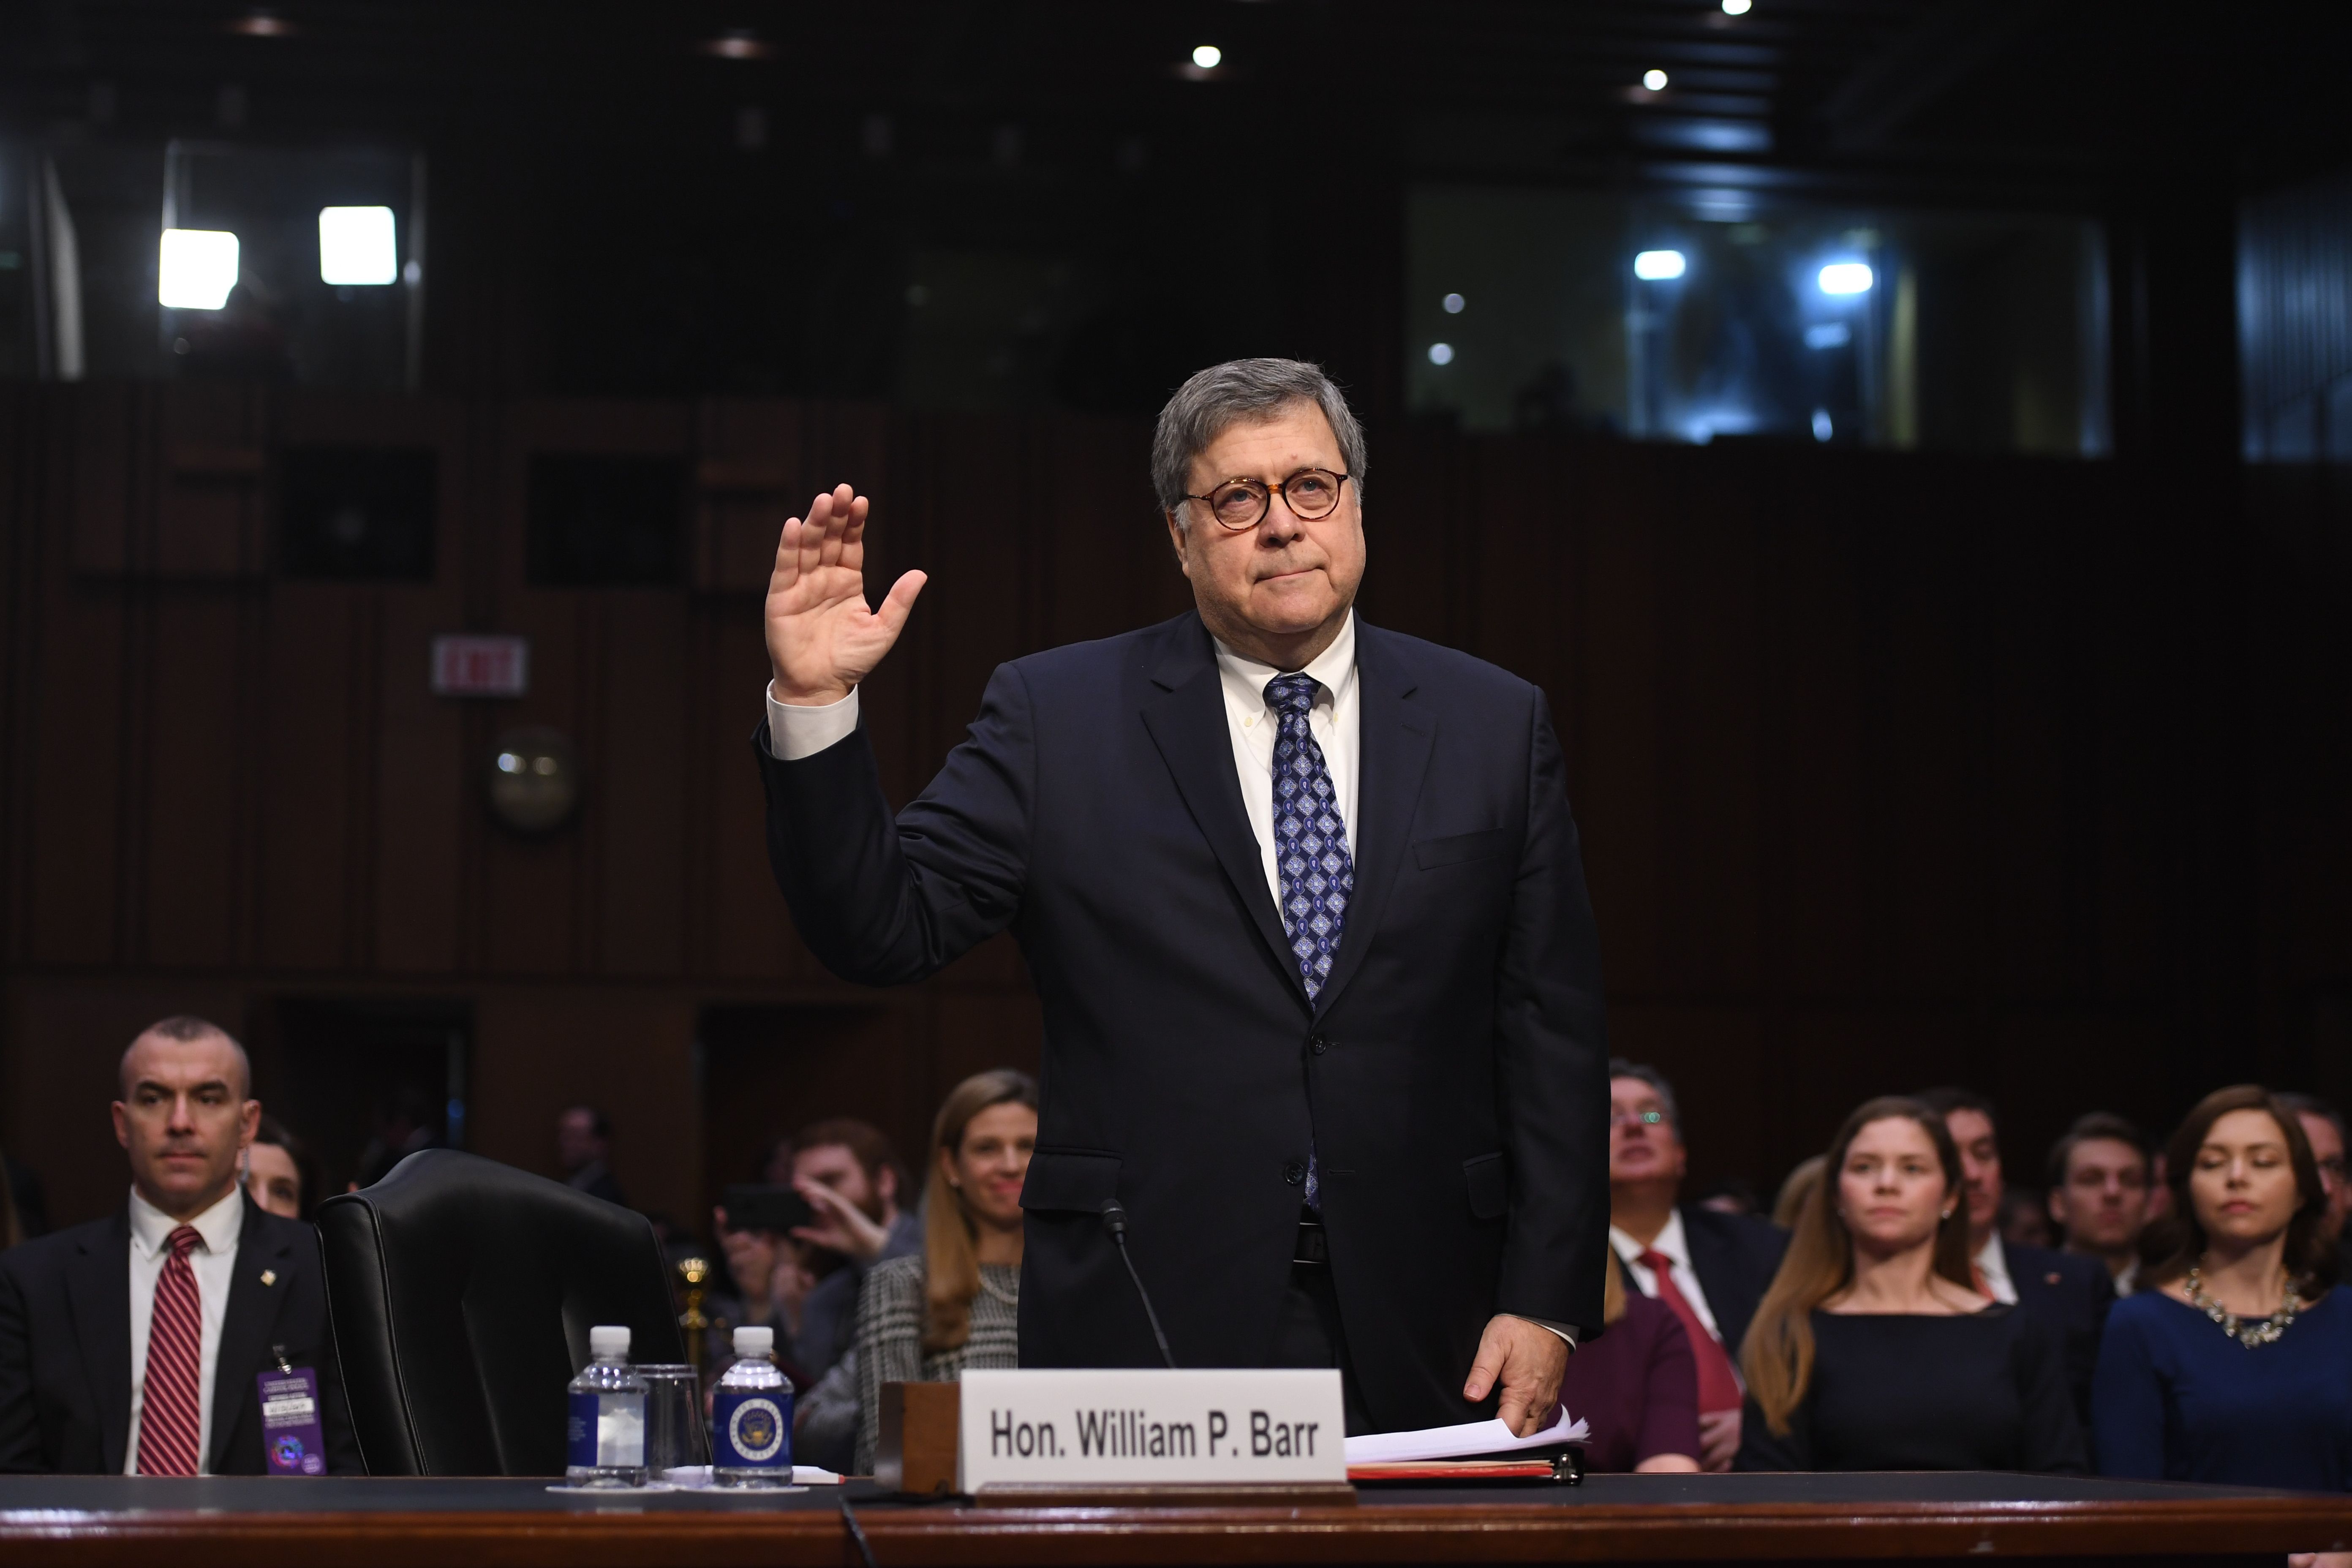 William Barr takes the oath before testifying during a Senate Judiciary Committee confirmation hearing. (SAUL LOEB/AFP/Getty Images)